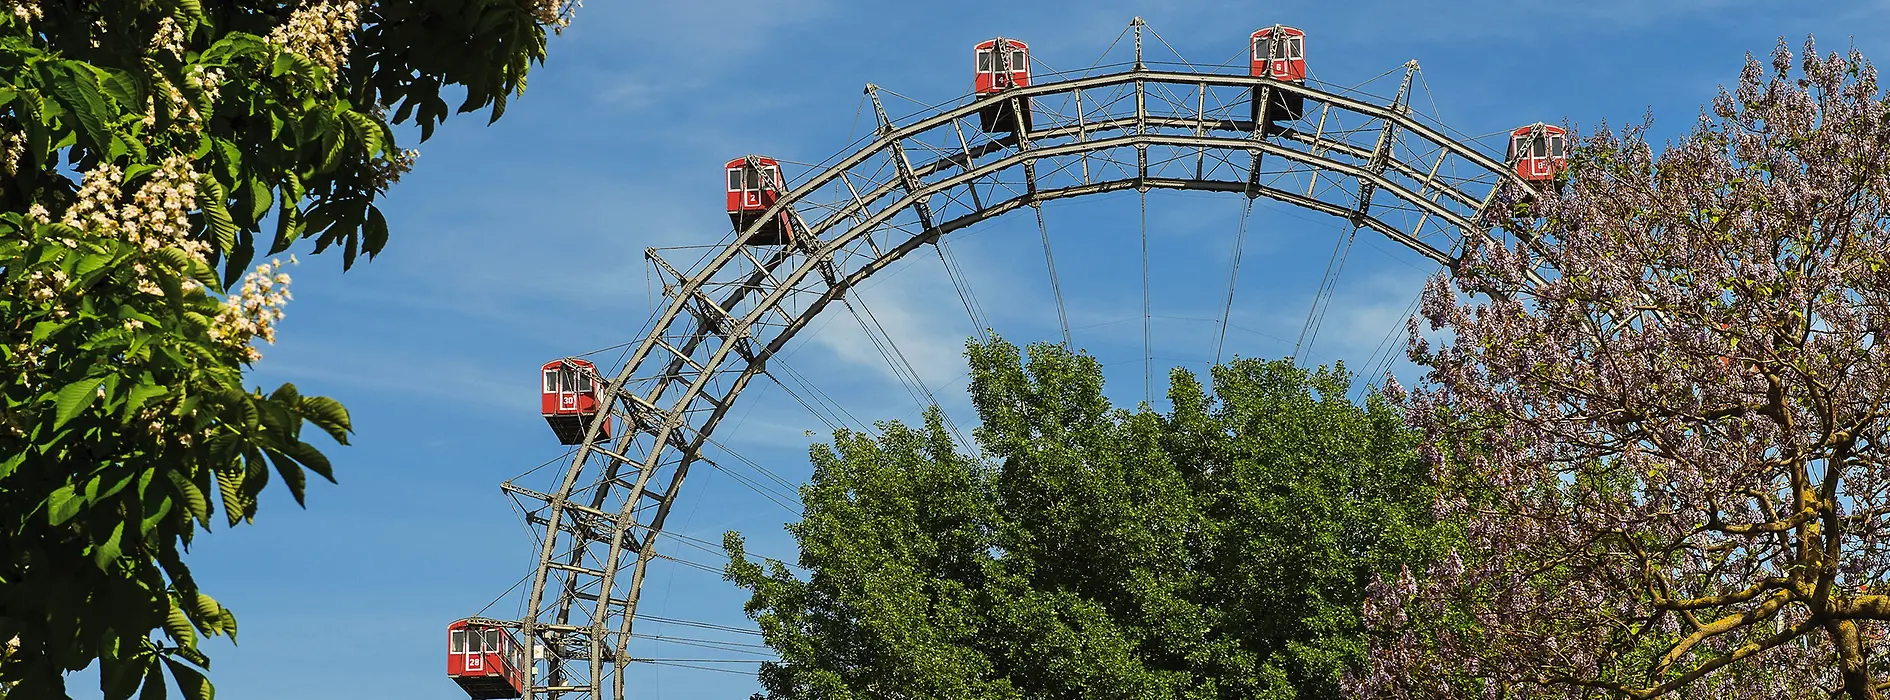 Prater Park and Giant Ferris Wheel